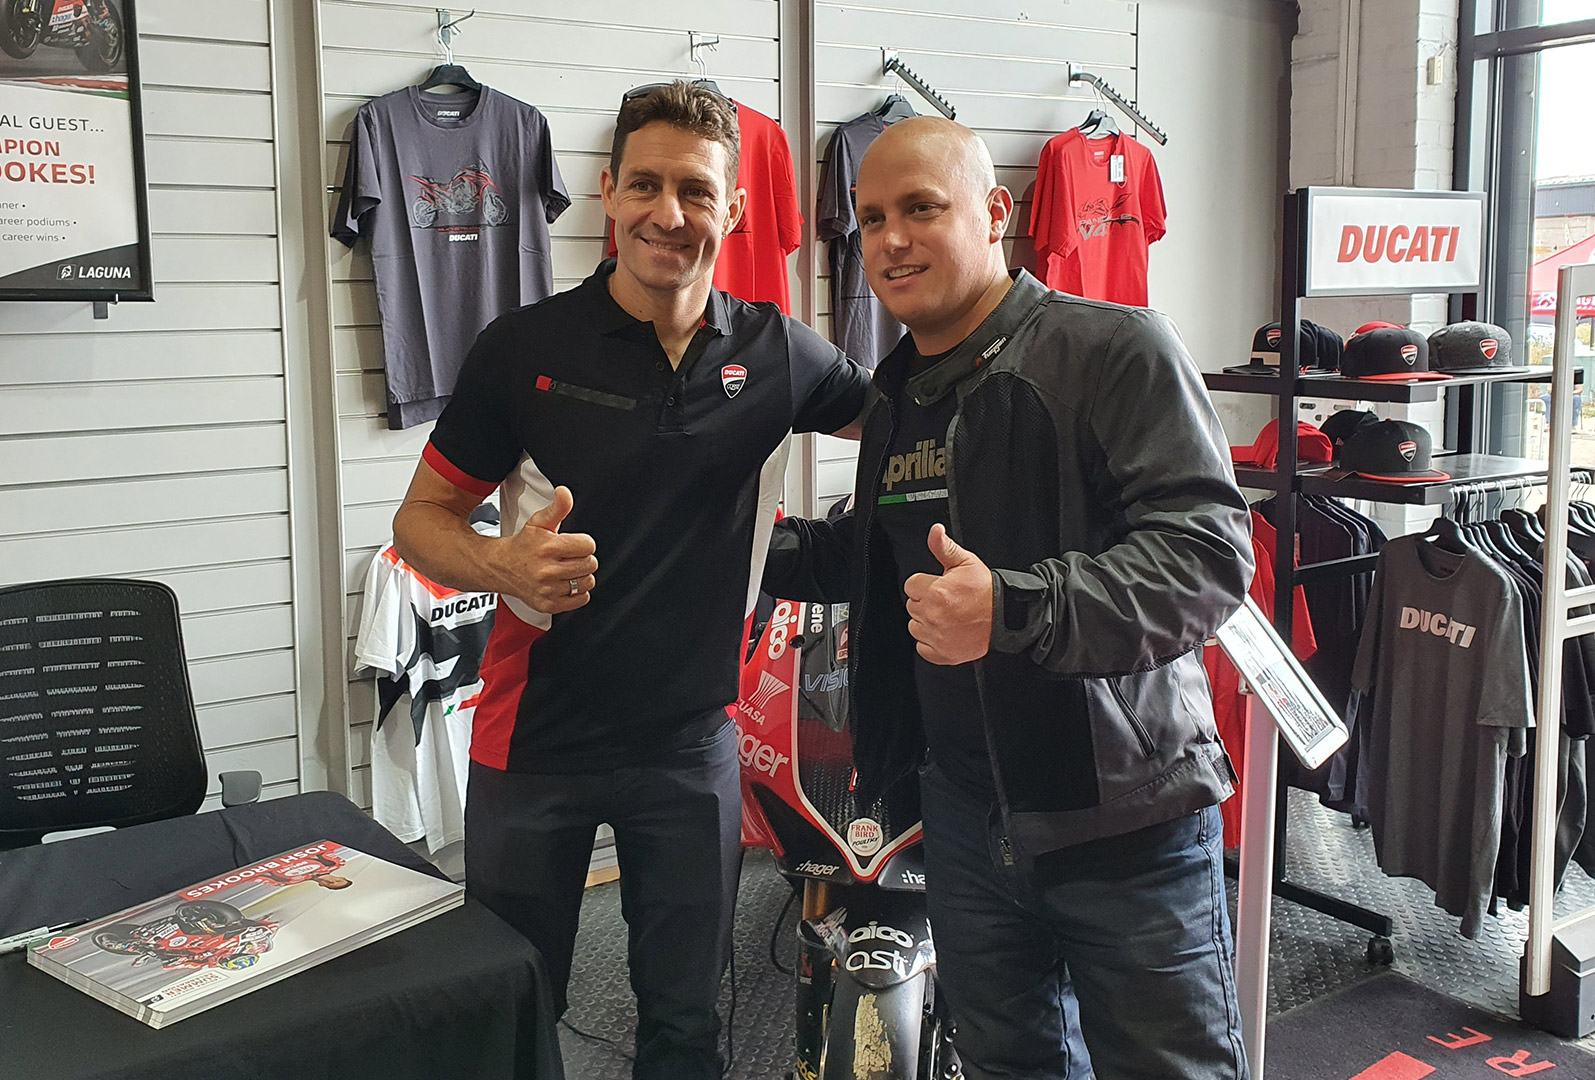 Josh Brookes Special Guest and Customer